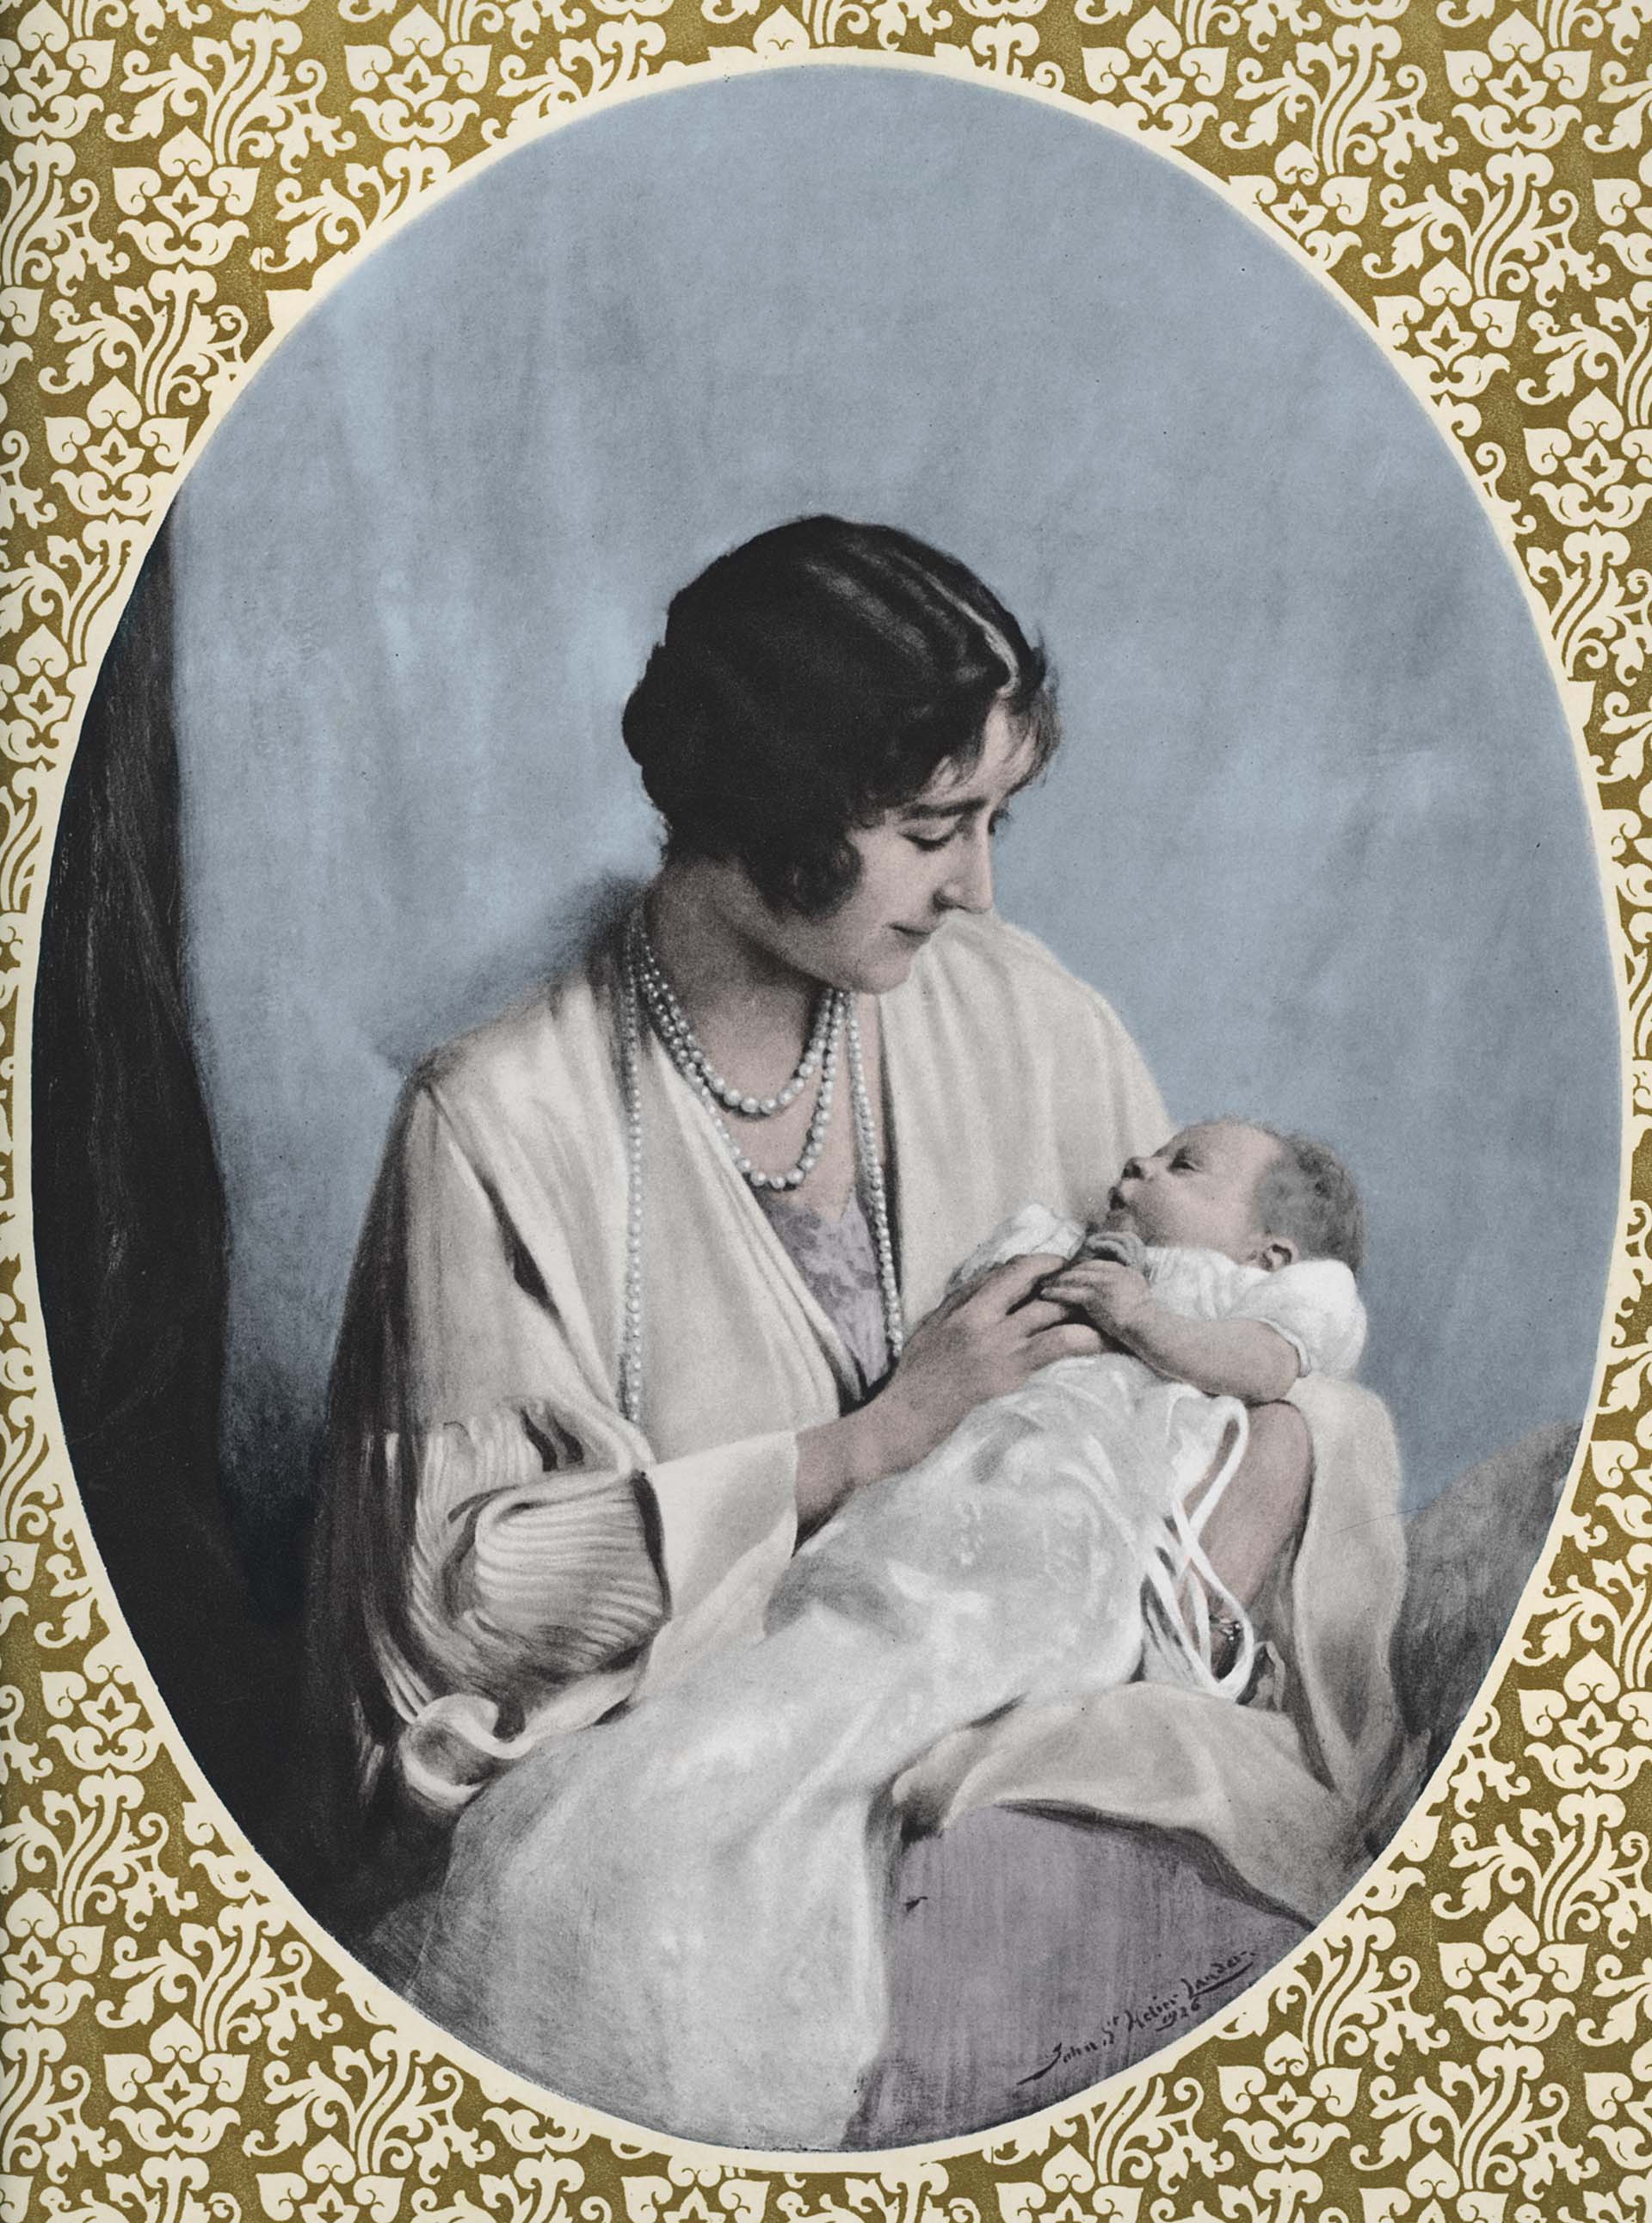 Portrait of Elizabeth II (1926-) as a baby held by her mother, Elizabeth (1900-2002). After the painting by John Helier Lander. (Photo by Culture Club/Getty Images)